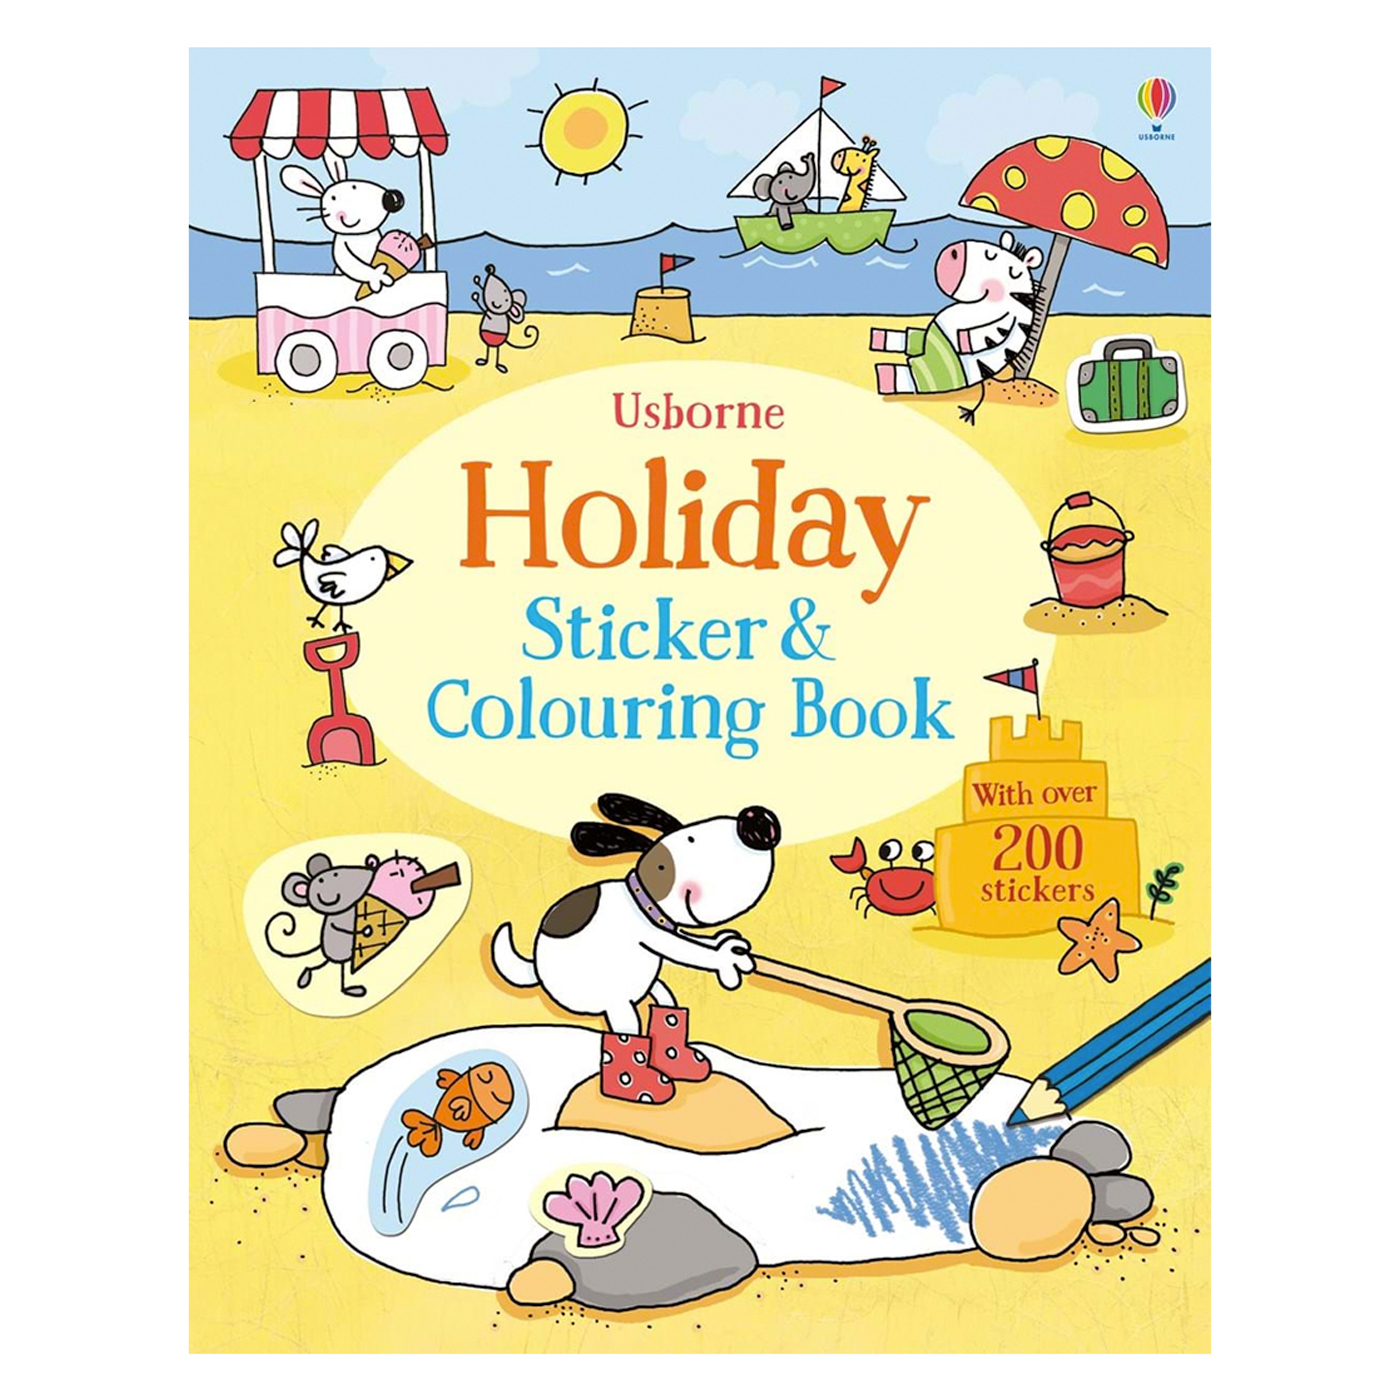  Holiday Sticker and Colouring Book